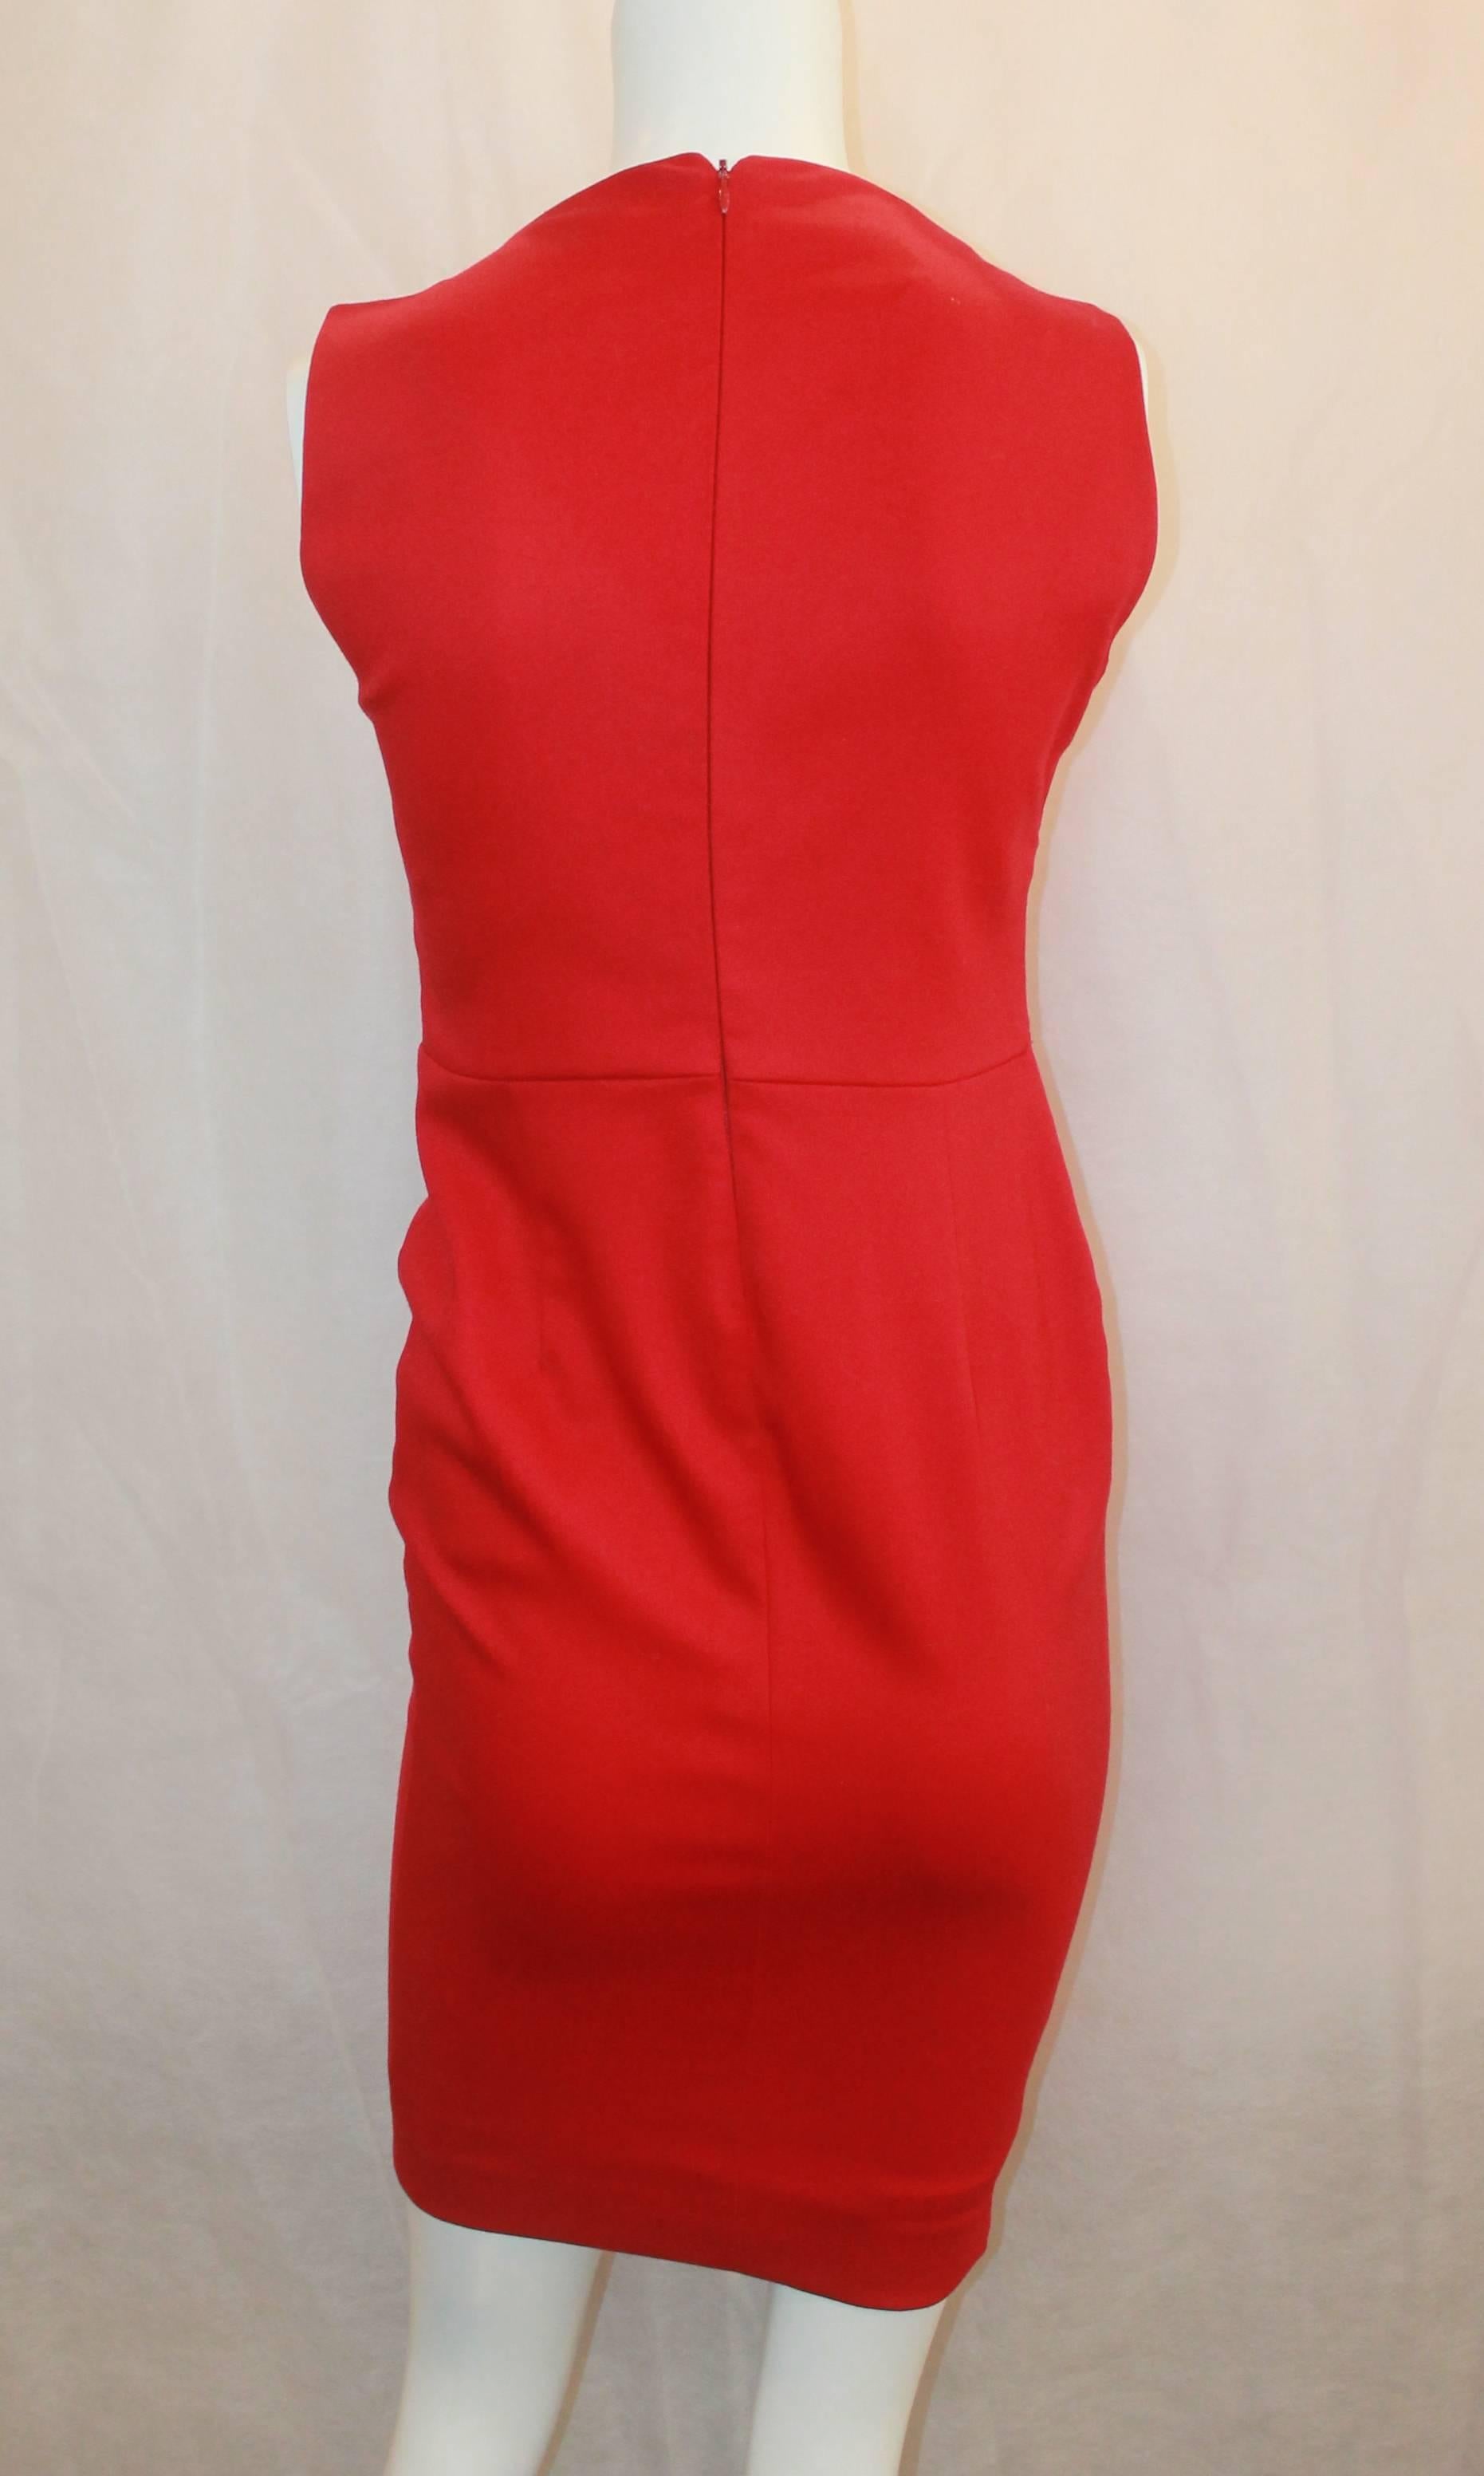 Women's Valentino Techno Couture Red Sleeveless Dress with Bow - 4 